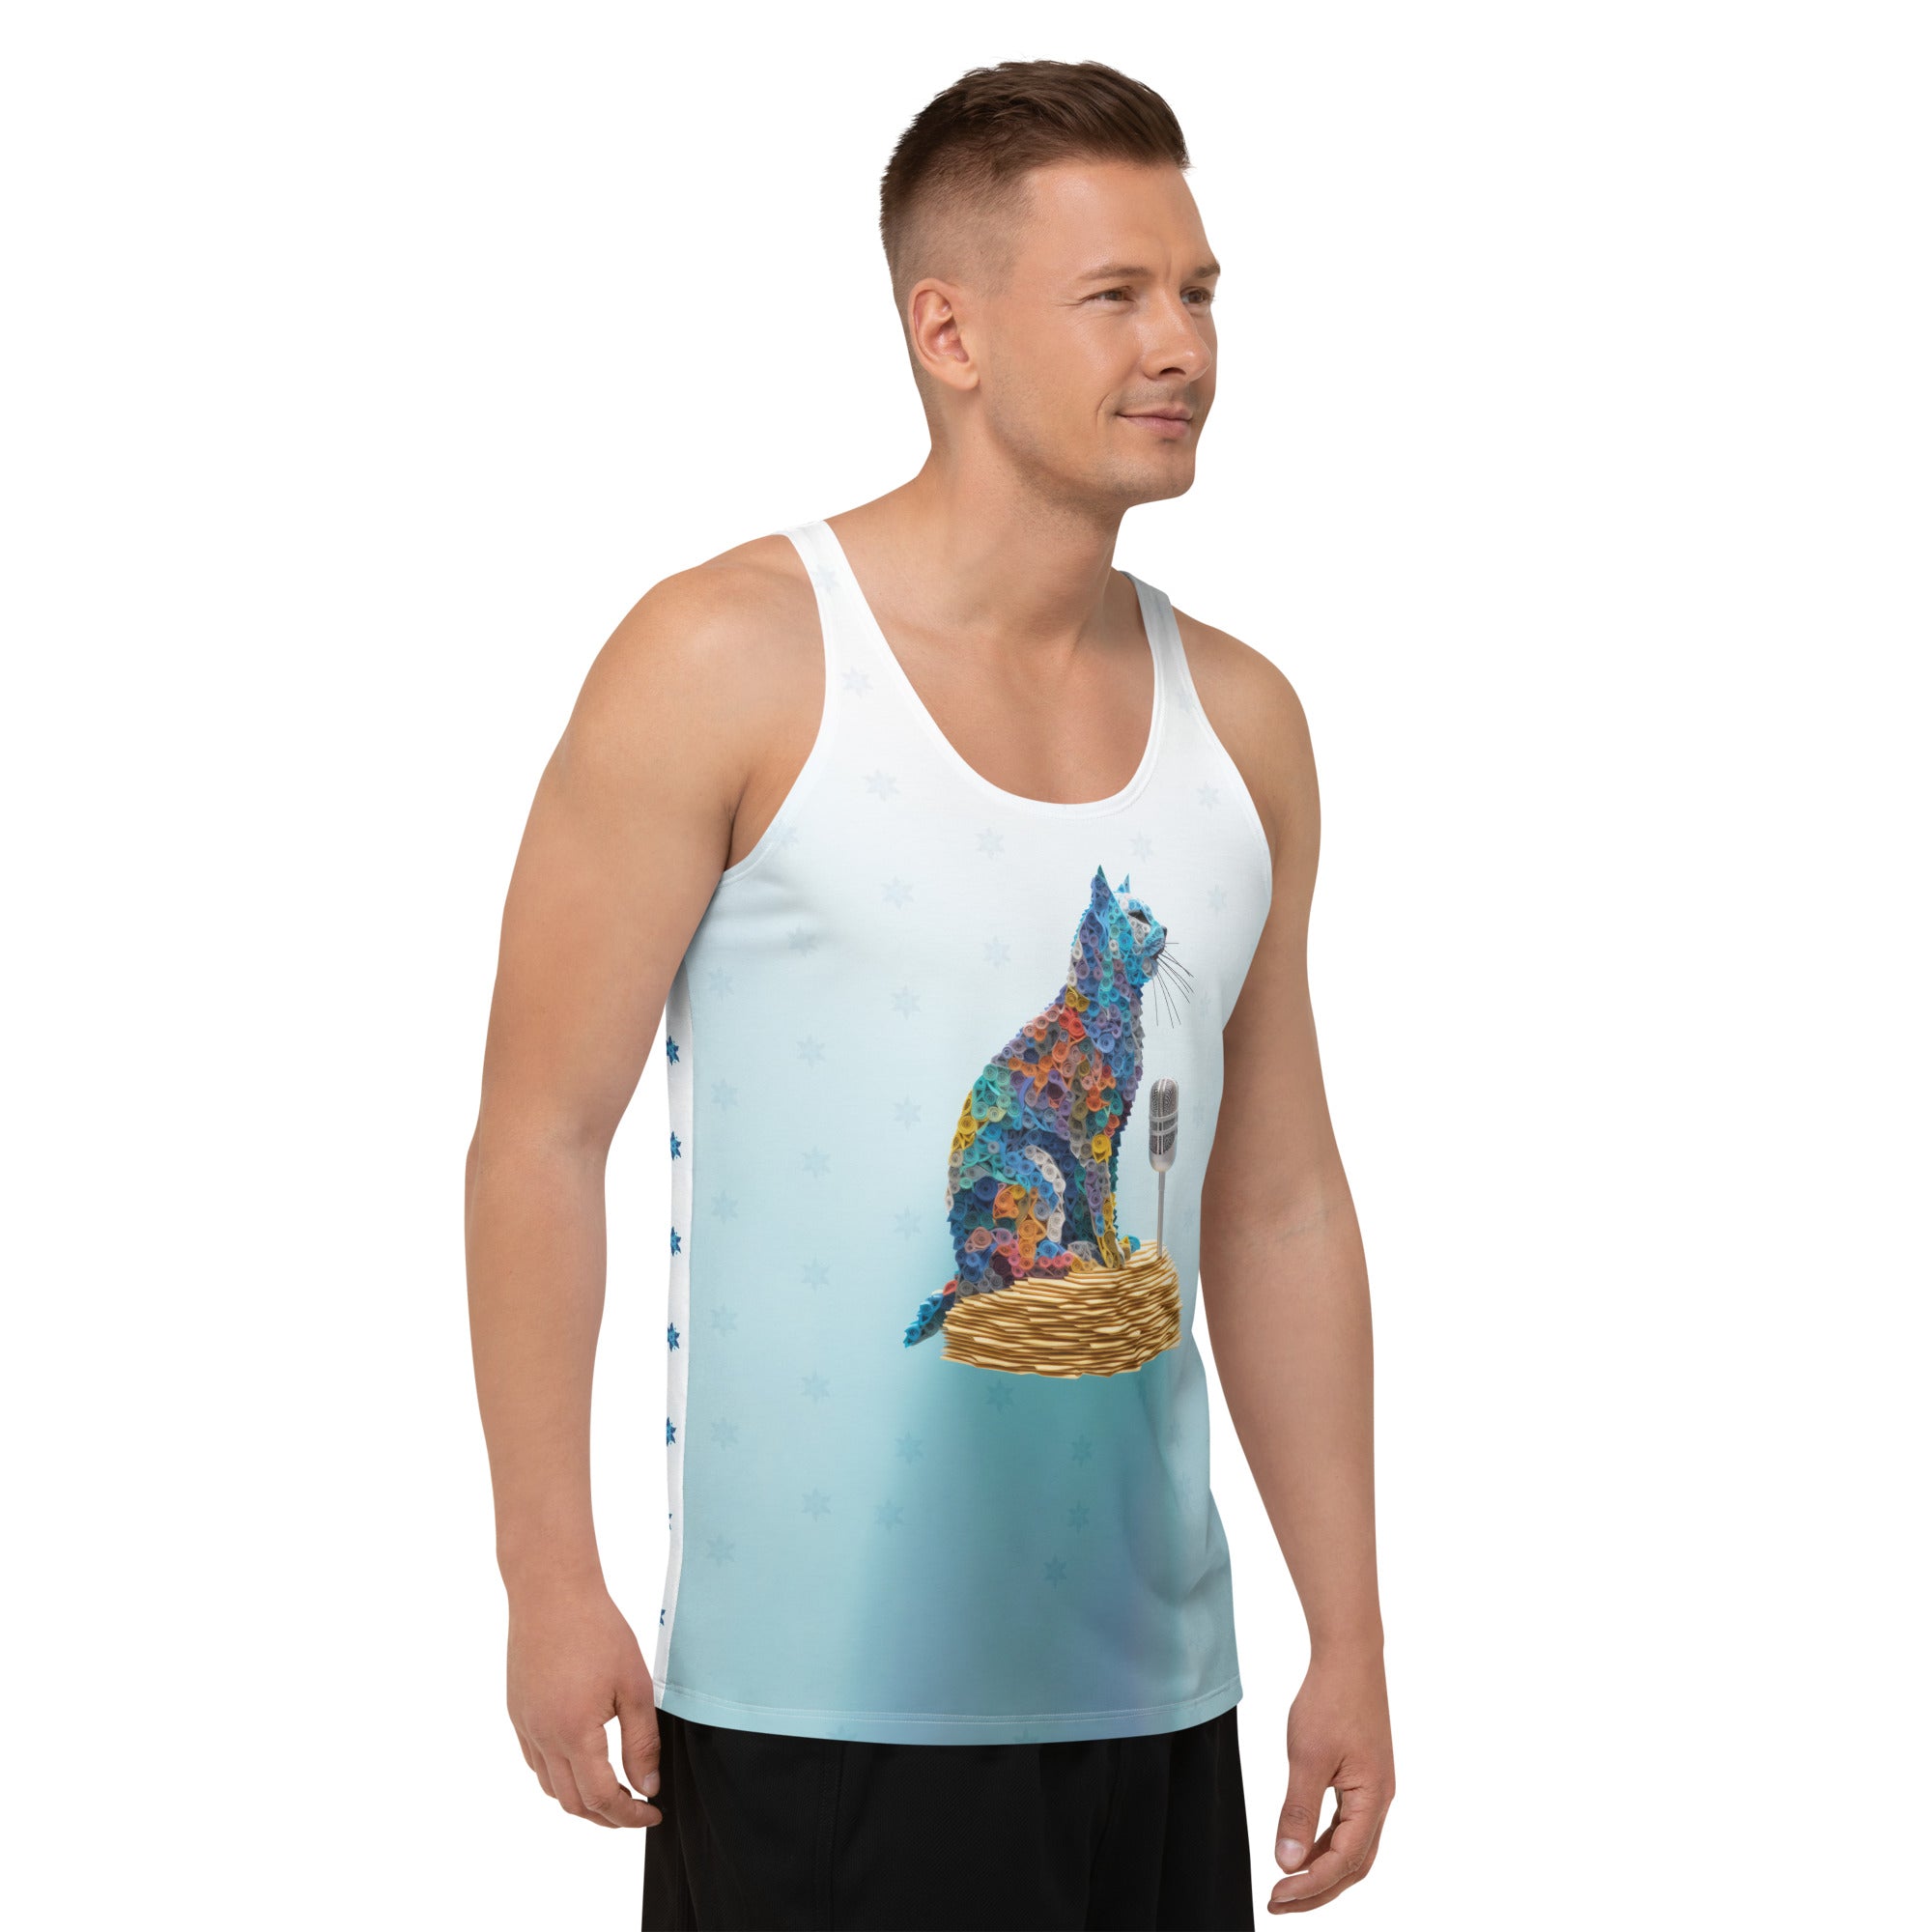 Stylish Origami Fox Cunning tank top in a casual setting.